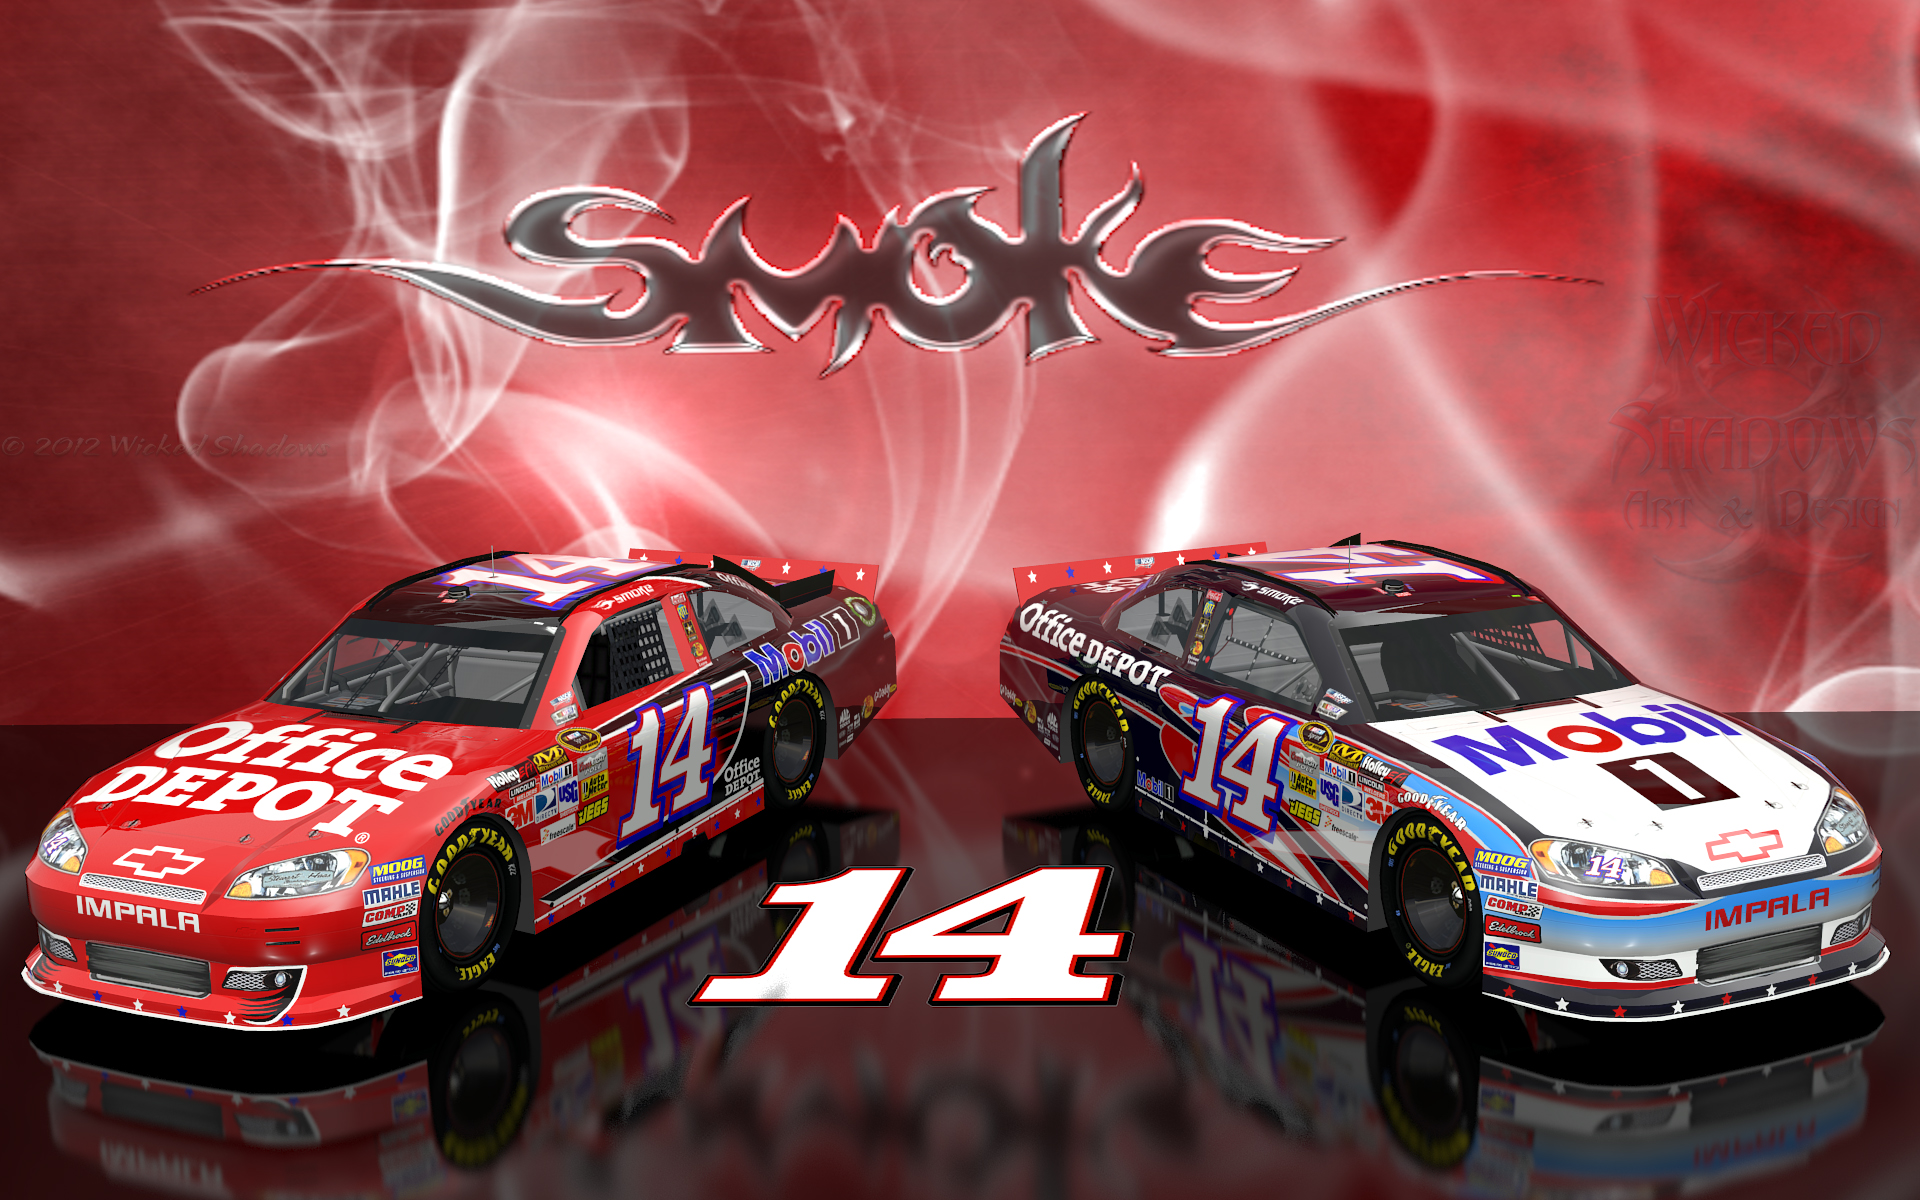 Wallpaper By Wicked Shadows Tony Stewart Office Depot Mobile Cars